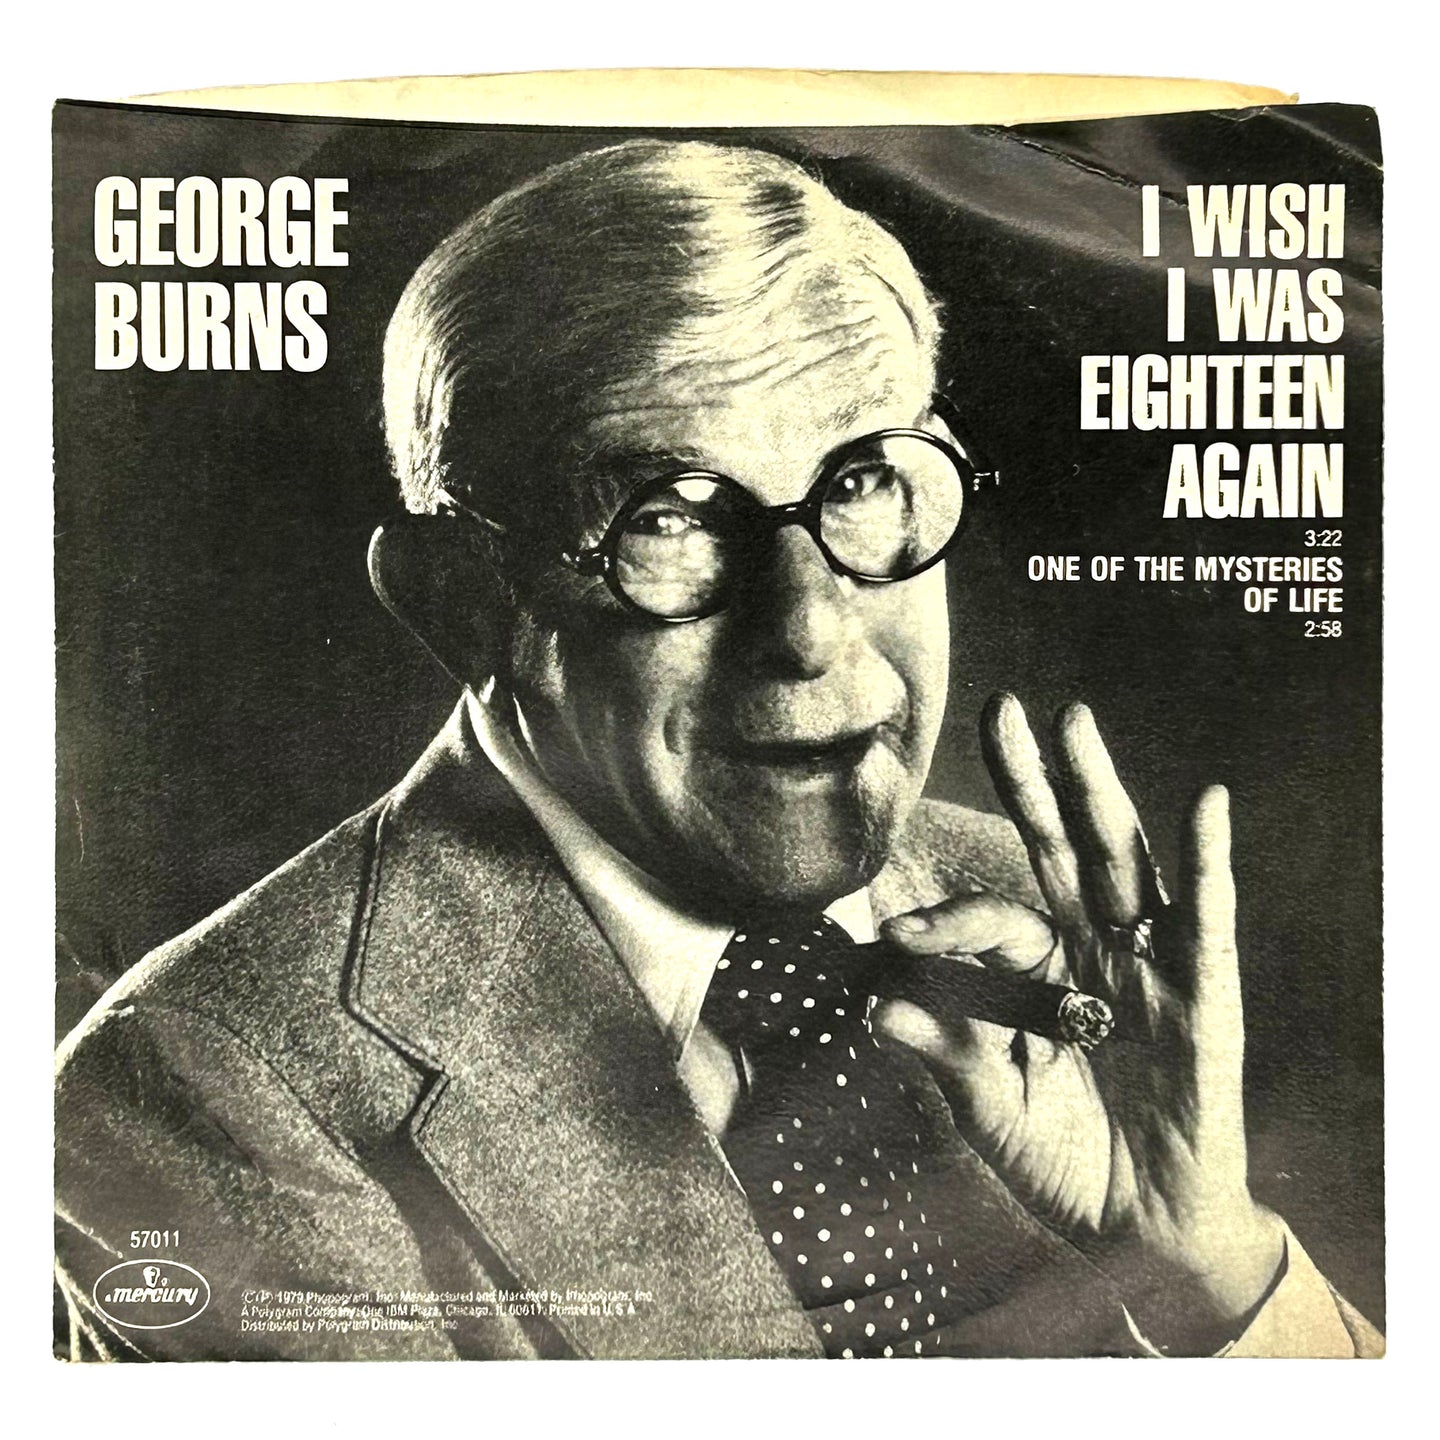 George Burns : I WISH I WAS EIGHTEEN AGAIN/ ONE OF THE MYSTERIES OF LIFE